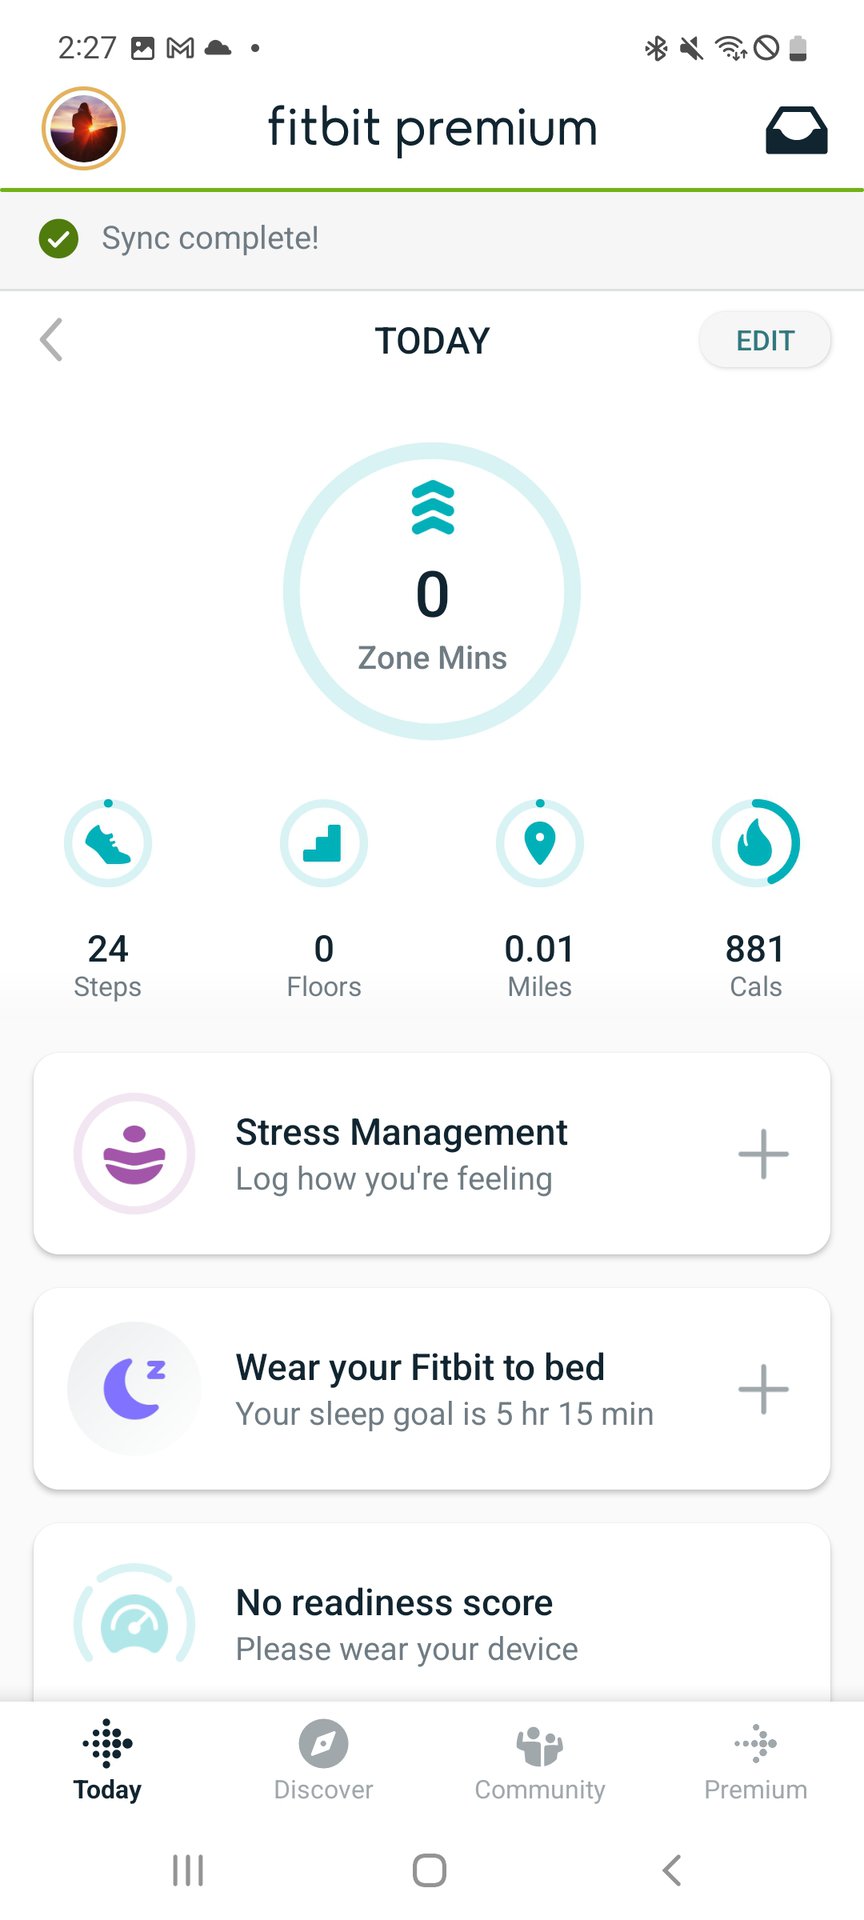 Fitbit App Sync Complete